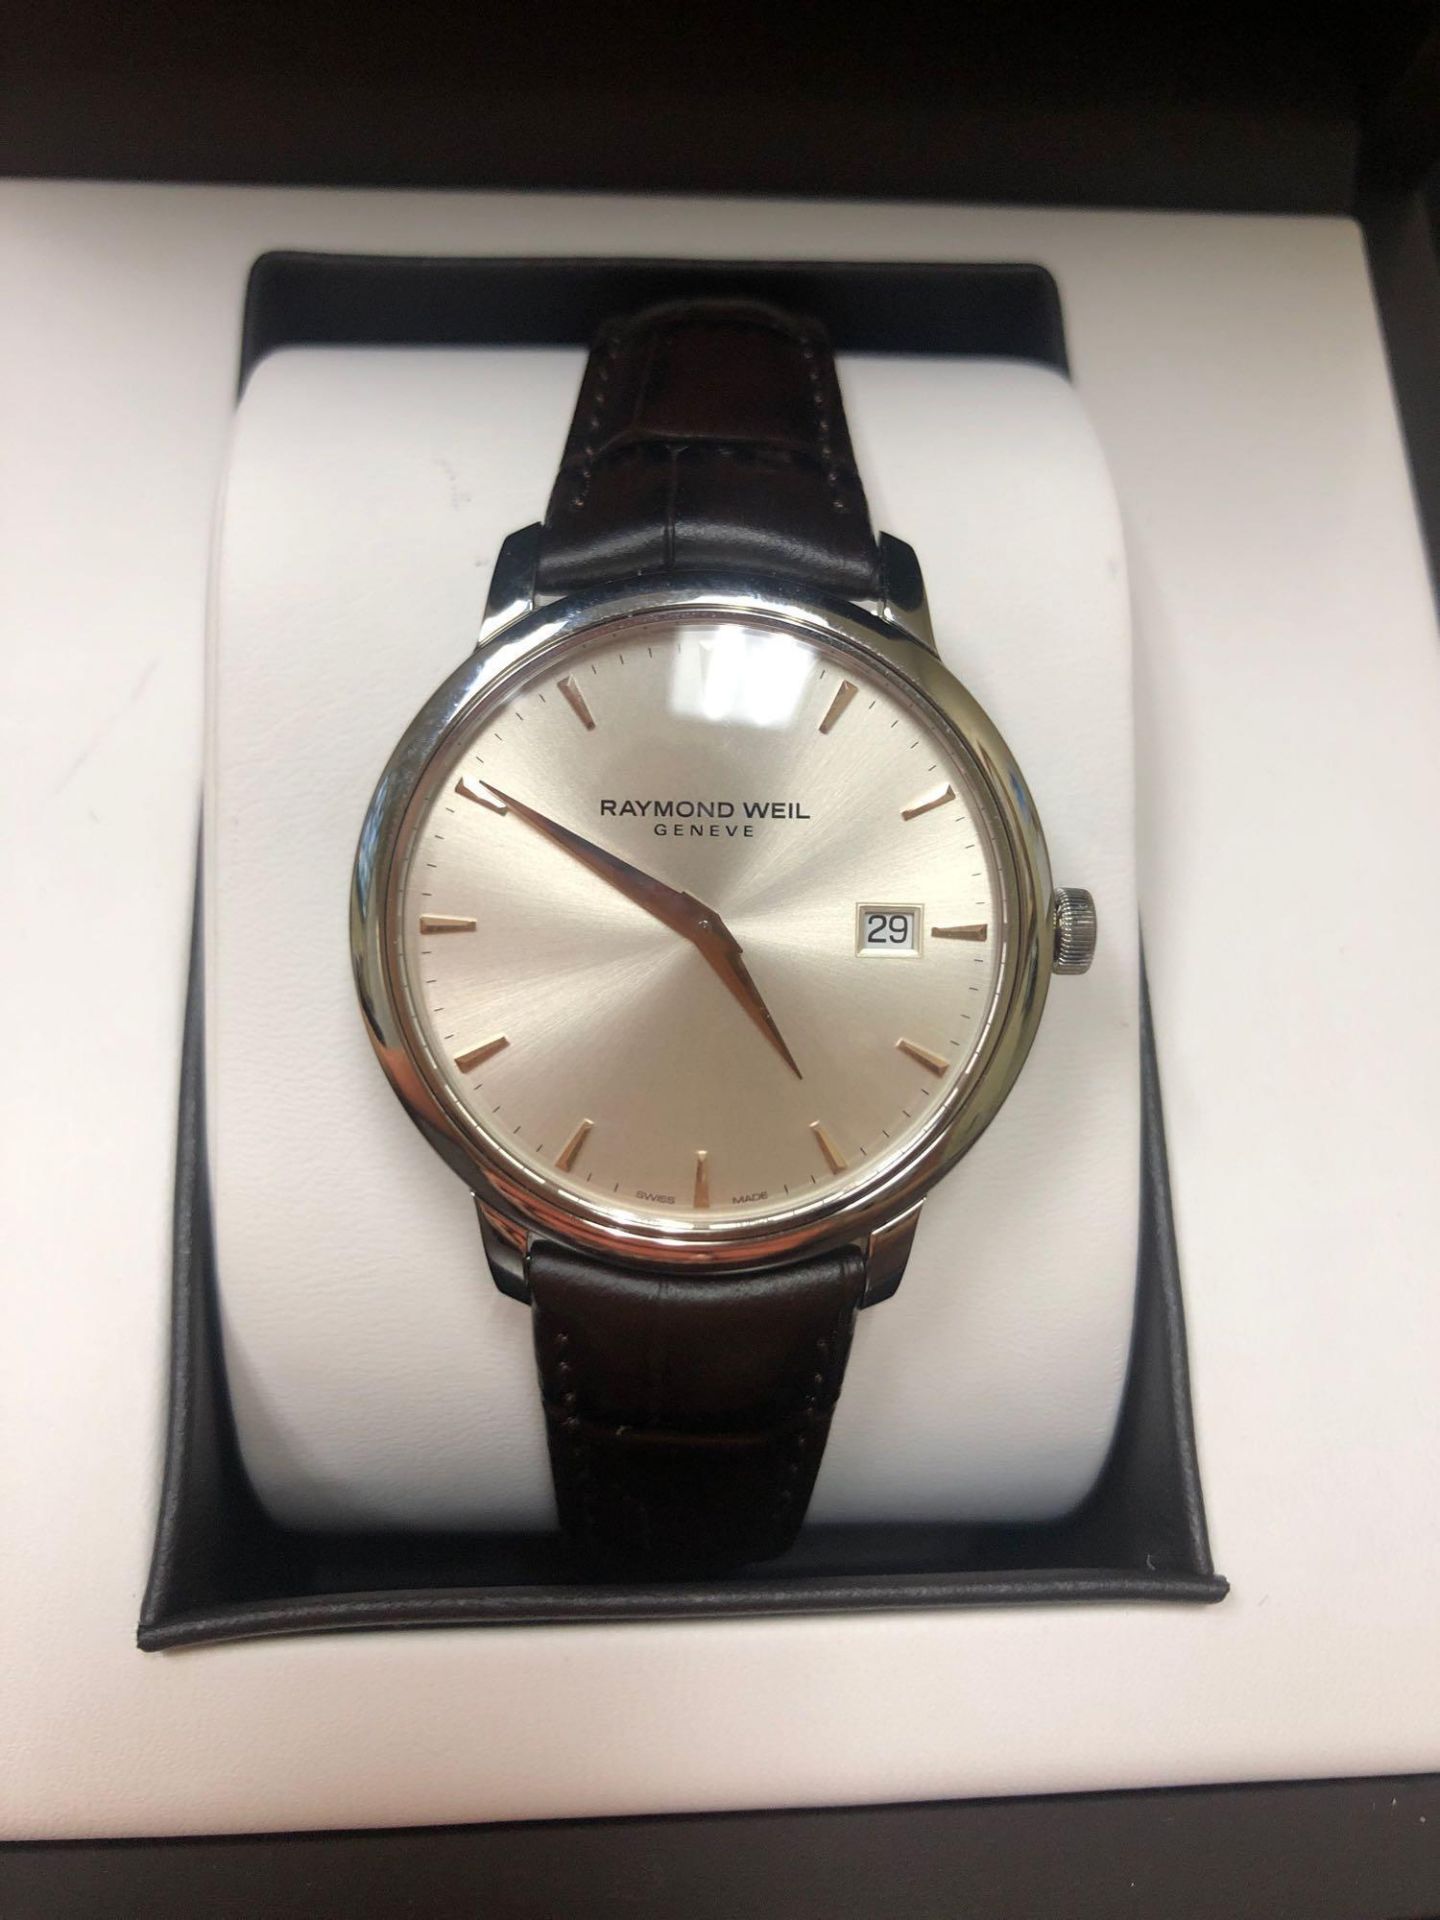 RAYMOND WEIL TOCCATA BROWN LEATHER STRAP SILVER AND ROSE TONE DIAL WATCH